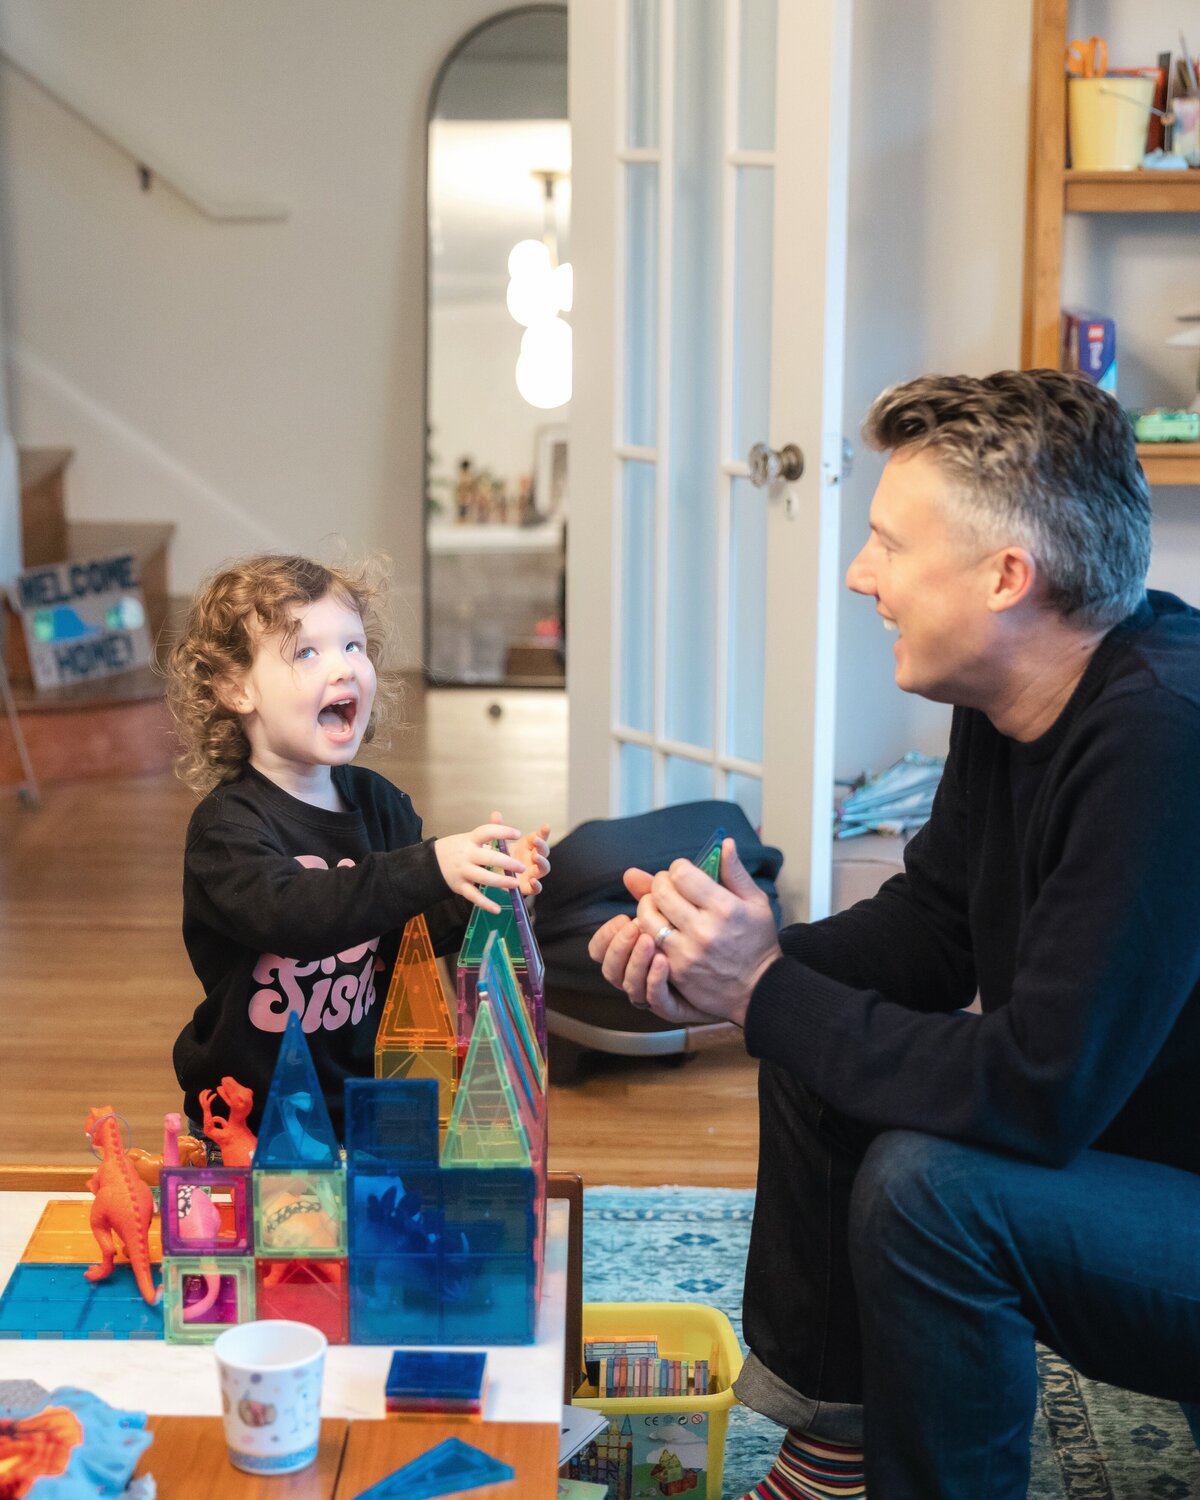 Daughter laughs while building magnatiles with her father